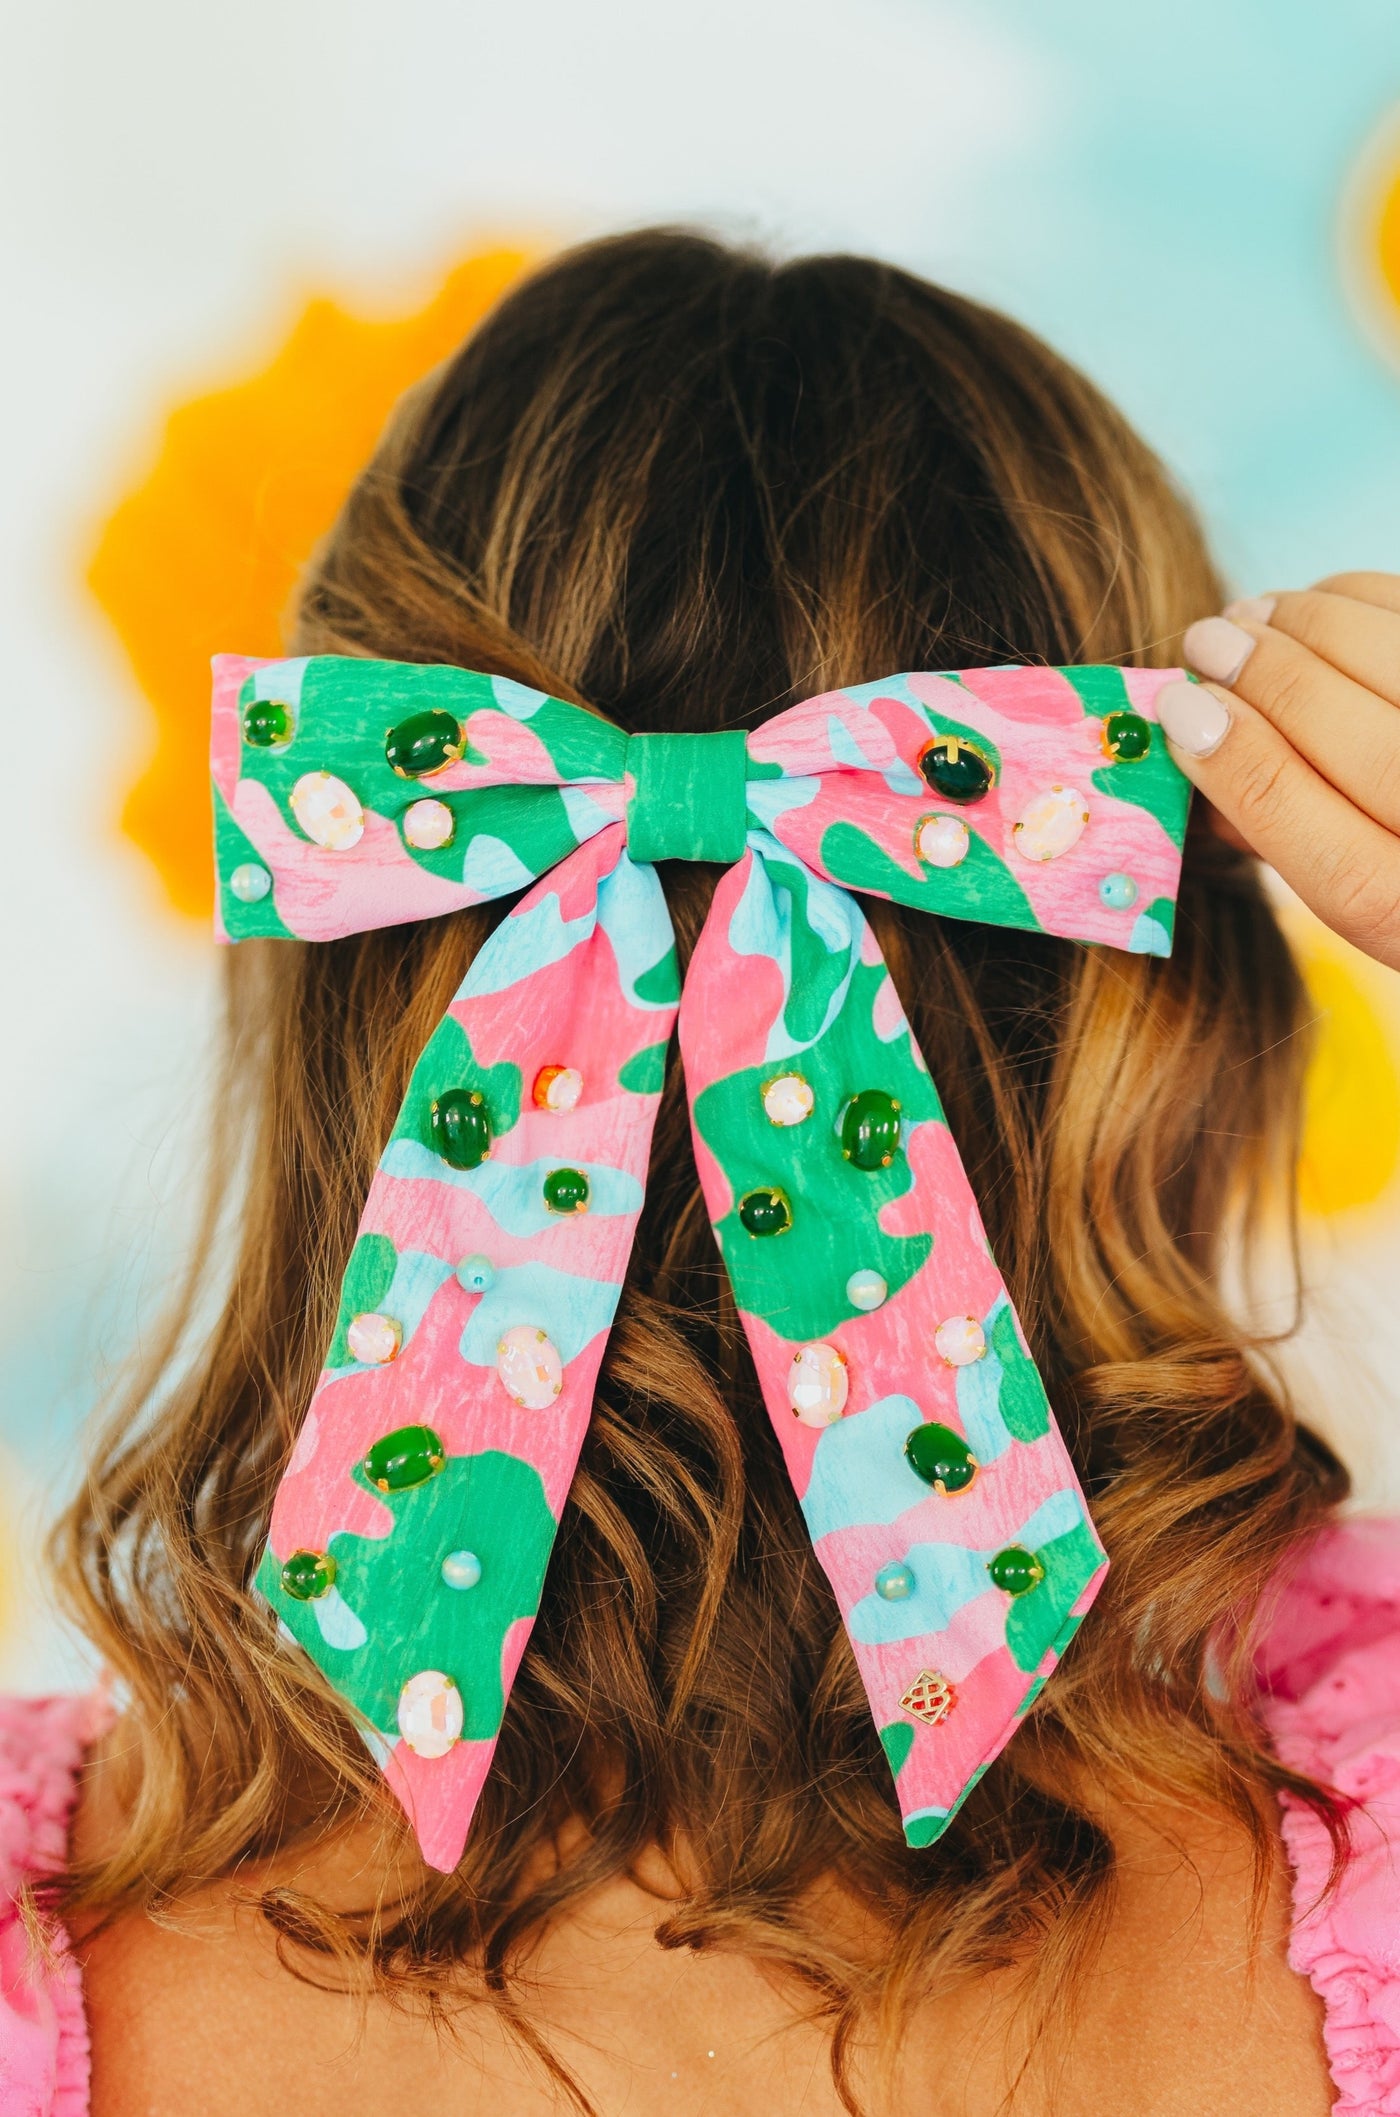 Pretty Country Pink, Green & Blue Bow Barrette